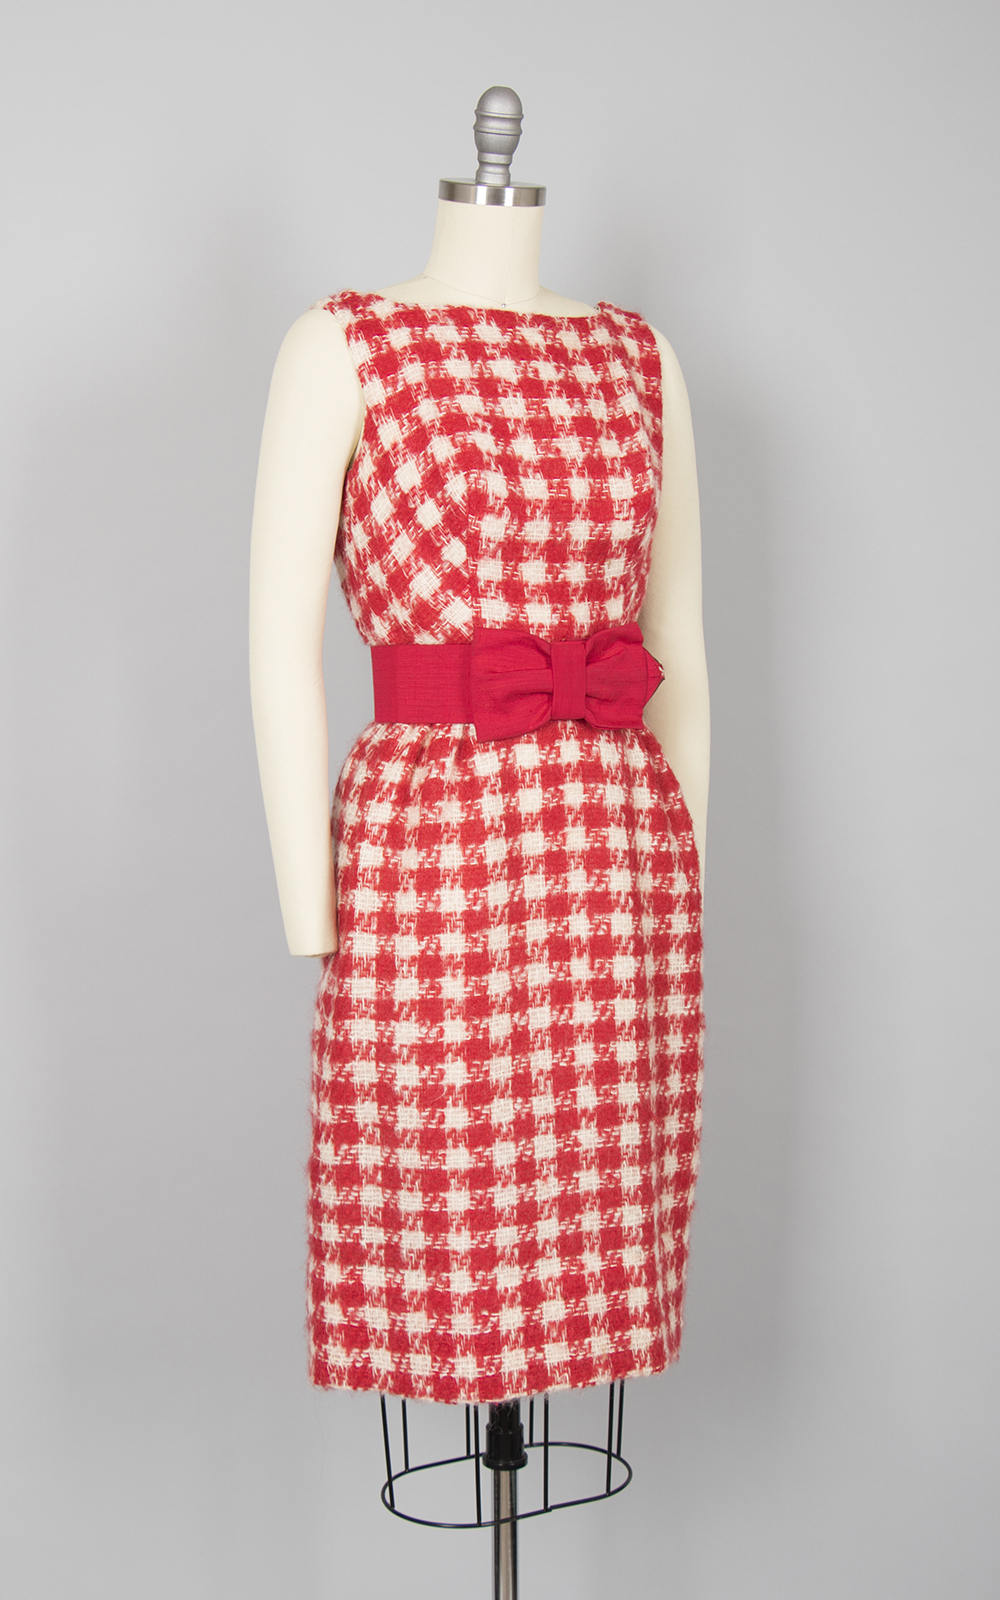 Vintage 1960s Dress | 60s Mohair Checkered Houndstooth Red Open Back Wiggle Bombshell Cocktail Holiday Party Dress w/ Bow Belt (small)